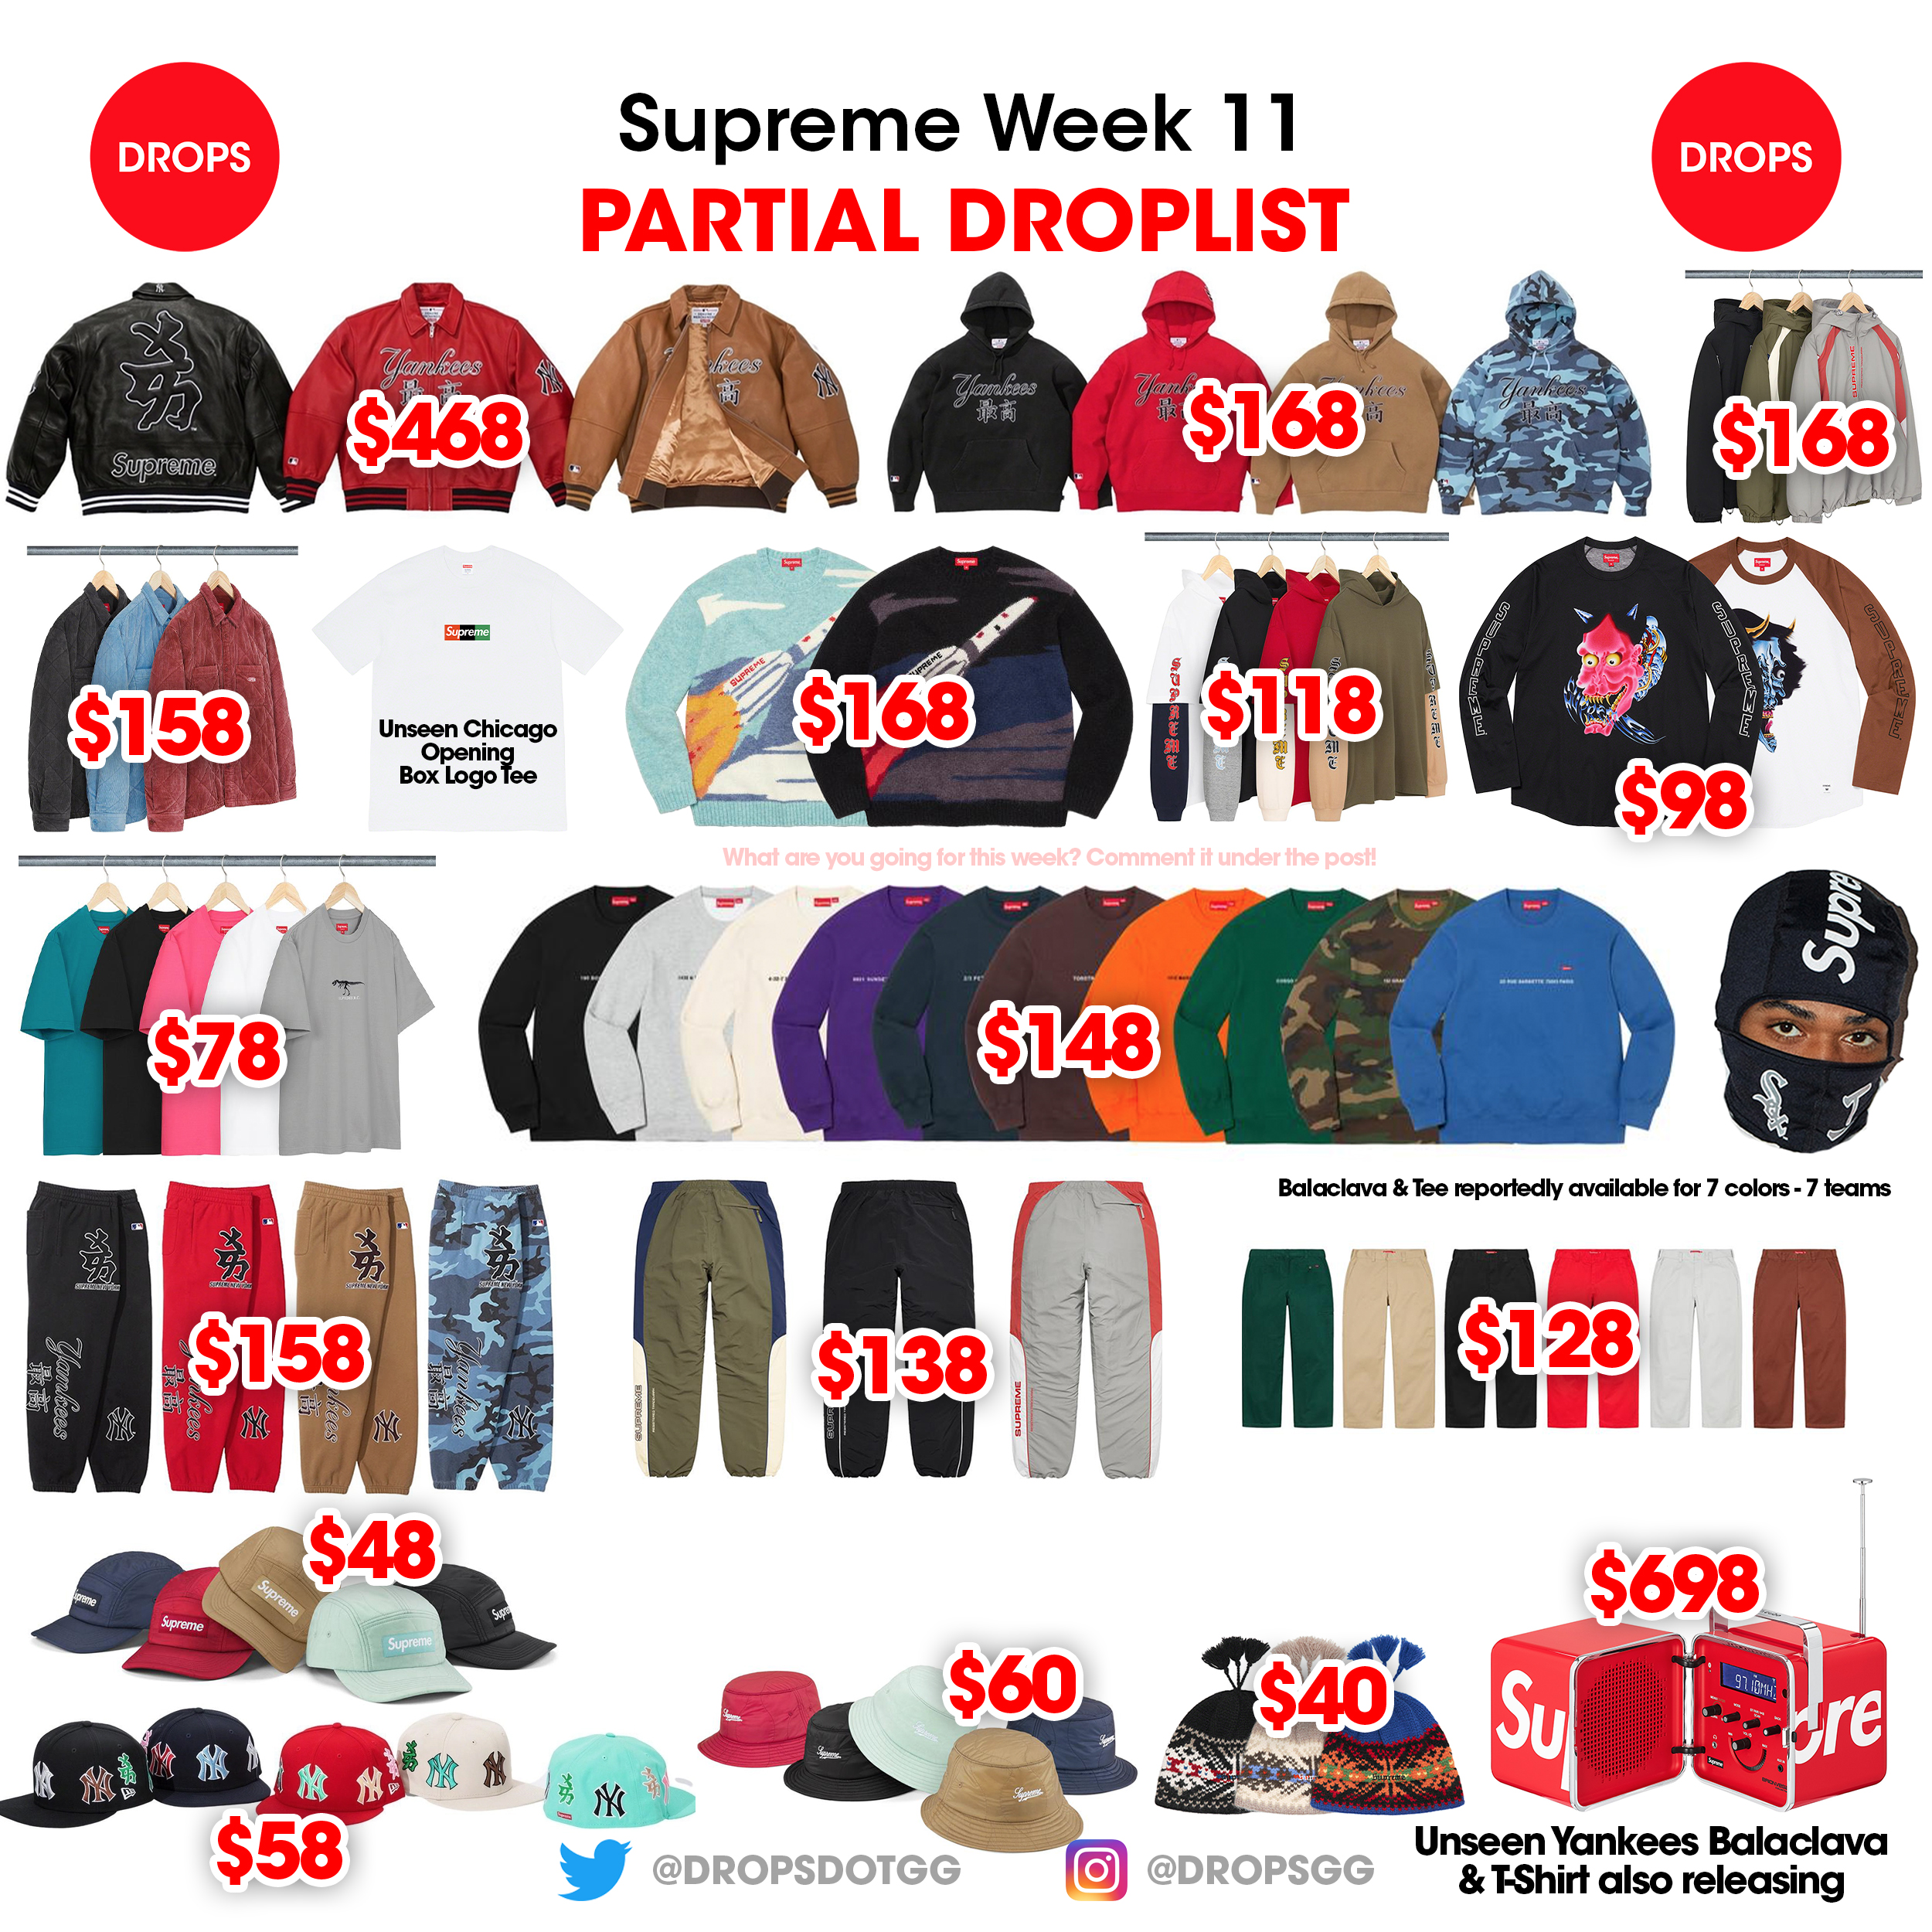 Supreme Drops on X: Supreme Week 11 - Partial Droplist & Retails  Estimations This week features the NY Yankees collaboration as well as some  unseen MLB Kanji Teams Balaclava & T-Shirts (reportedly